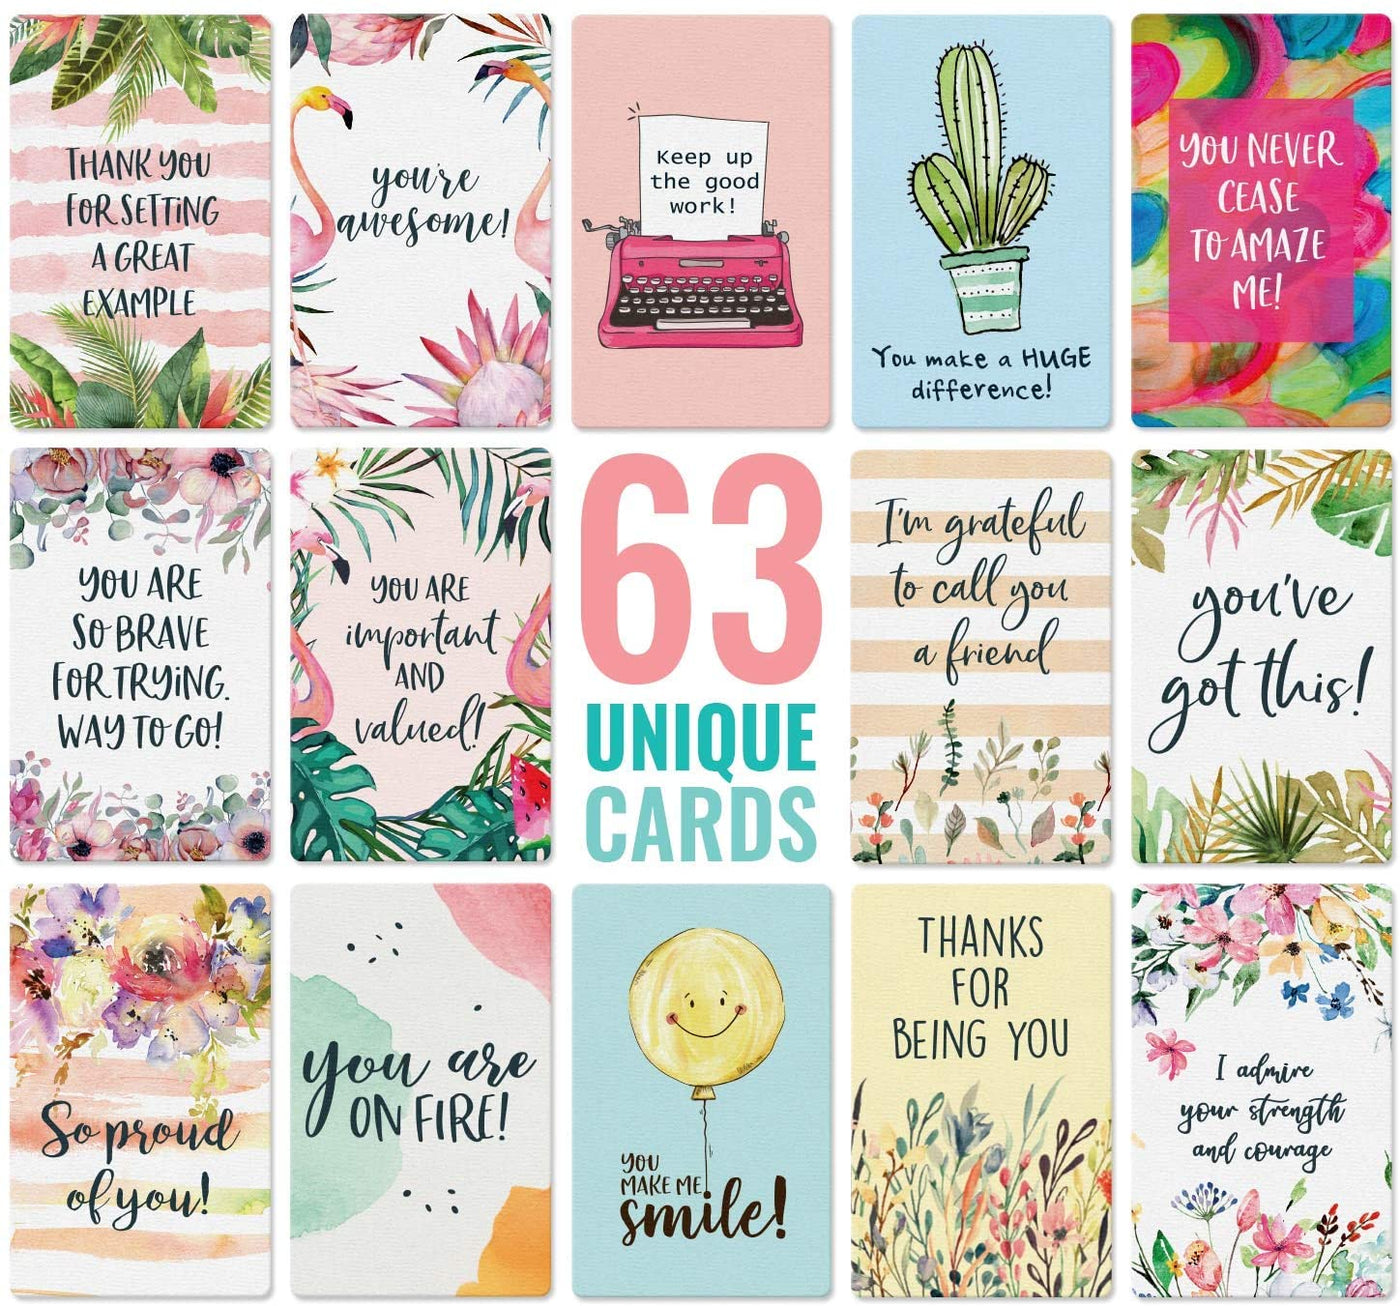 Dessie 63 Unique Motivational Cards with Inspirational Quotes-Business Card Sized